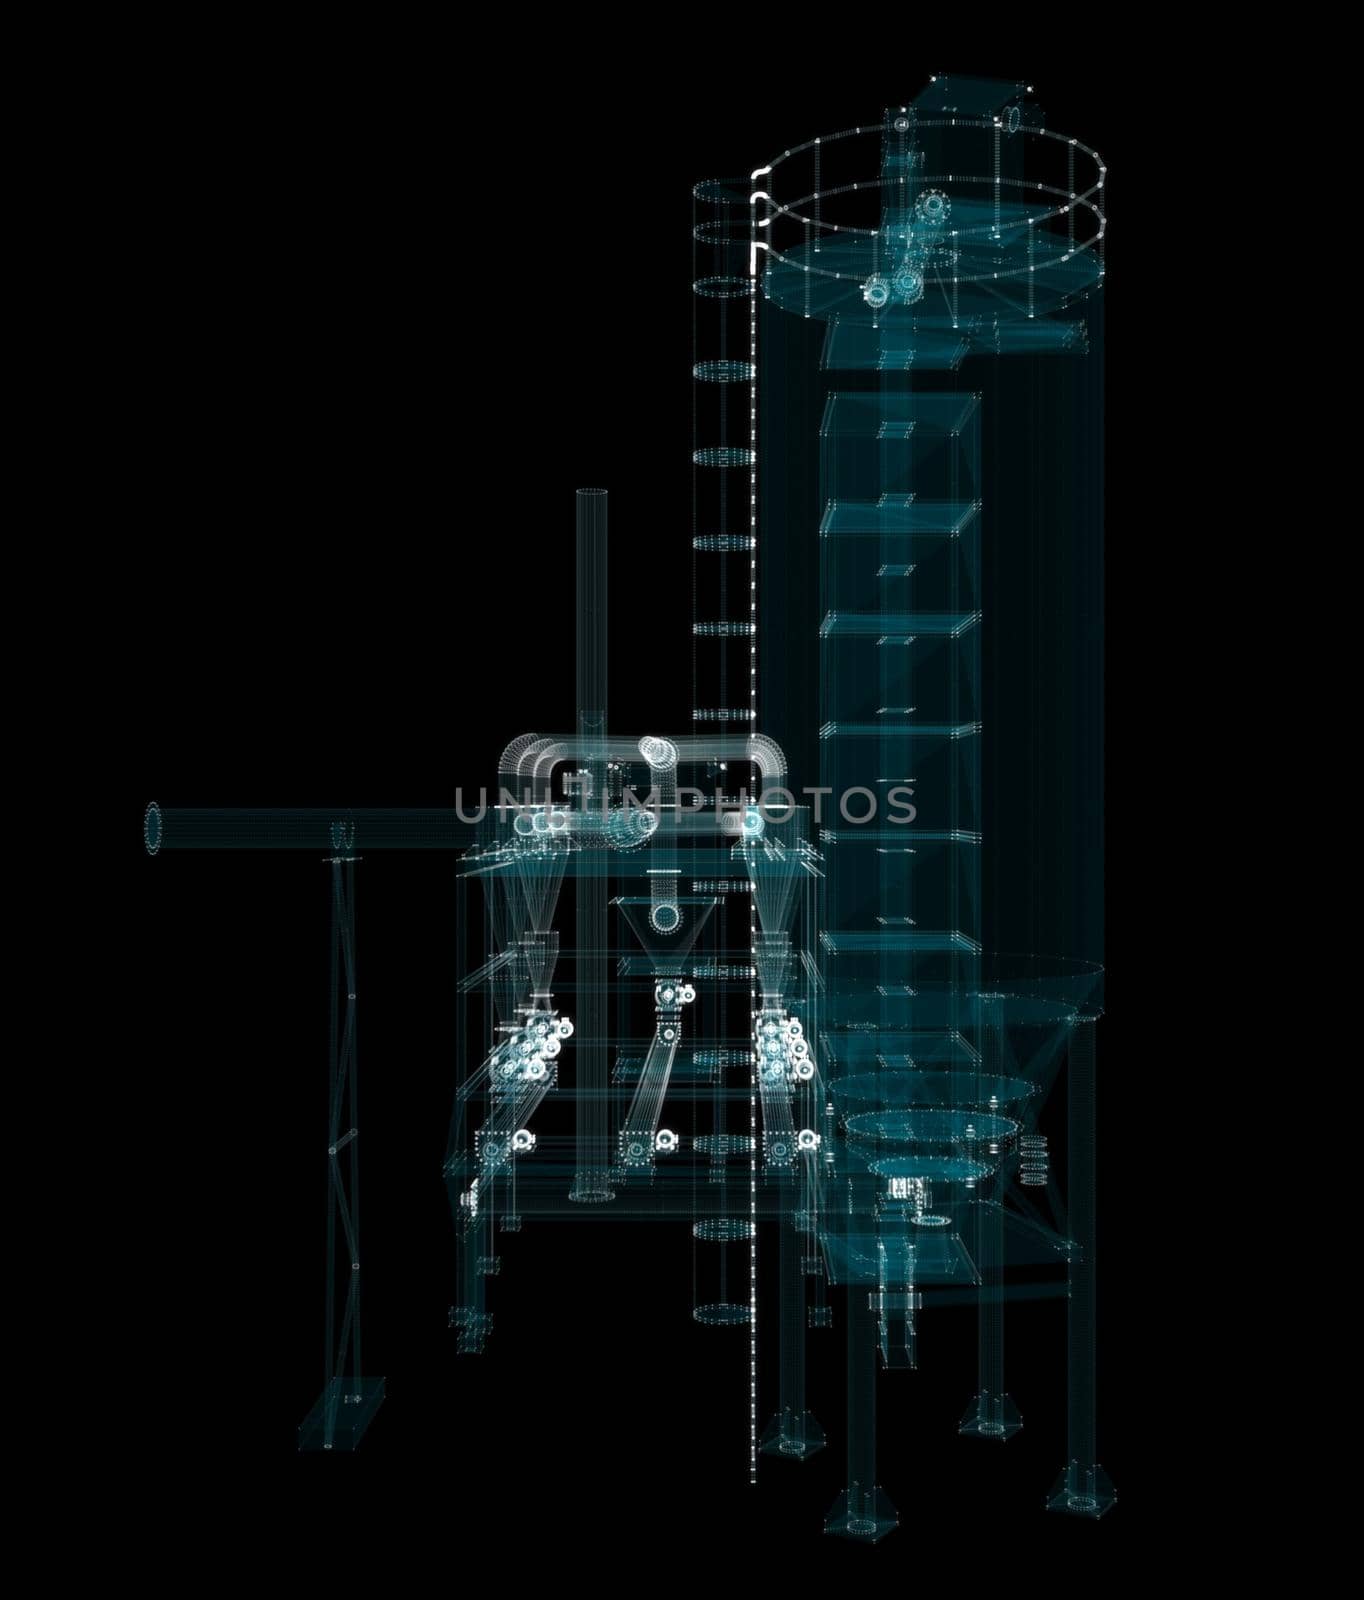 Industrial Technology Concept. Particle hologram industrial equipment, valves, pipes and sensors. Industry 4.0 High Tech Concept. 3d illustration